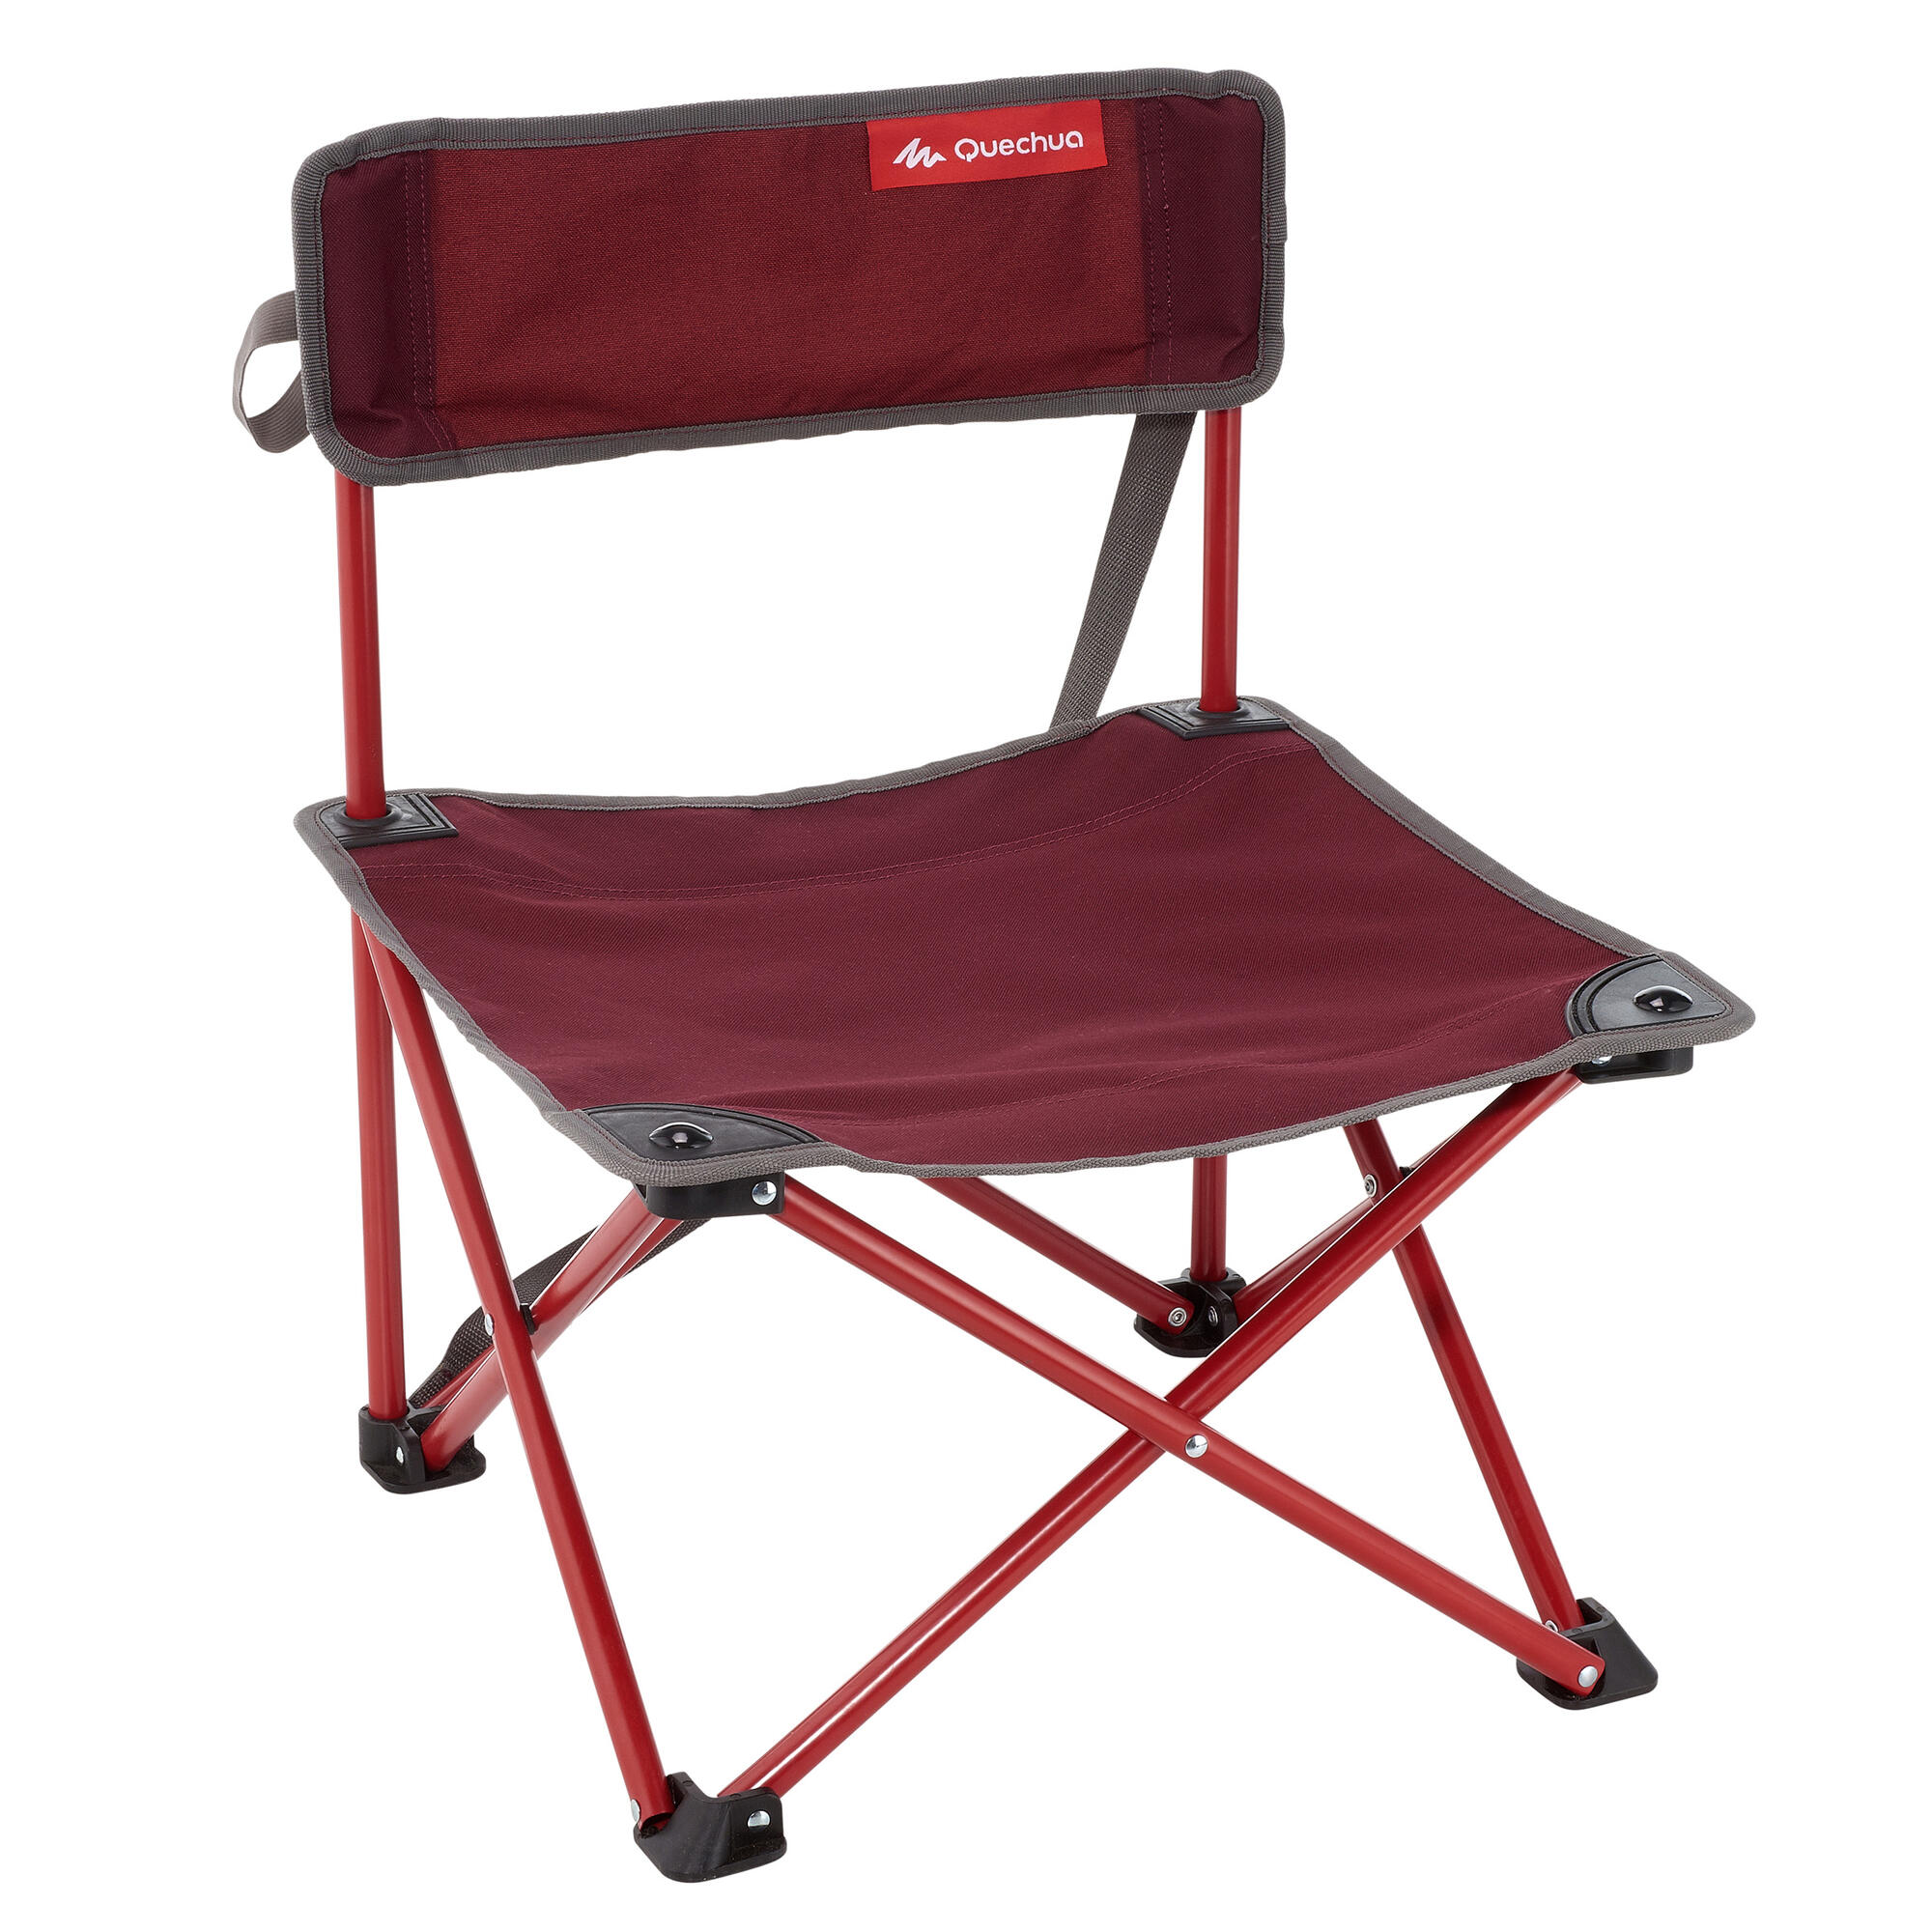 Low camping chair | Quechua